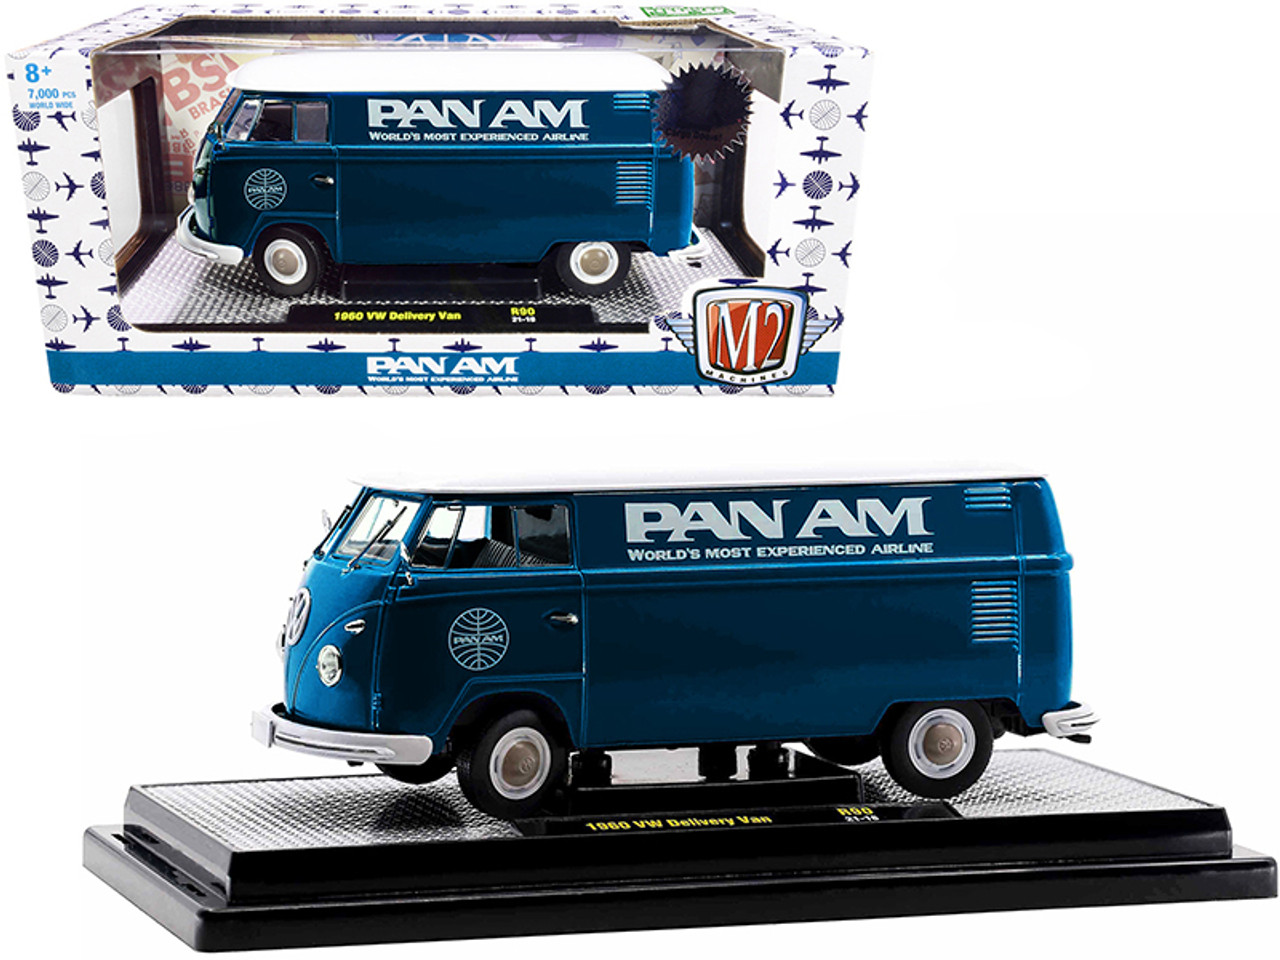 1960 Volkswagen Delivery Van "Pan Am" Turquoise with White Top Limited Edition to 7000 pieces Worldwide 1/24 Diecast Model by M2 Machines